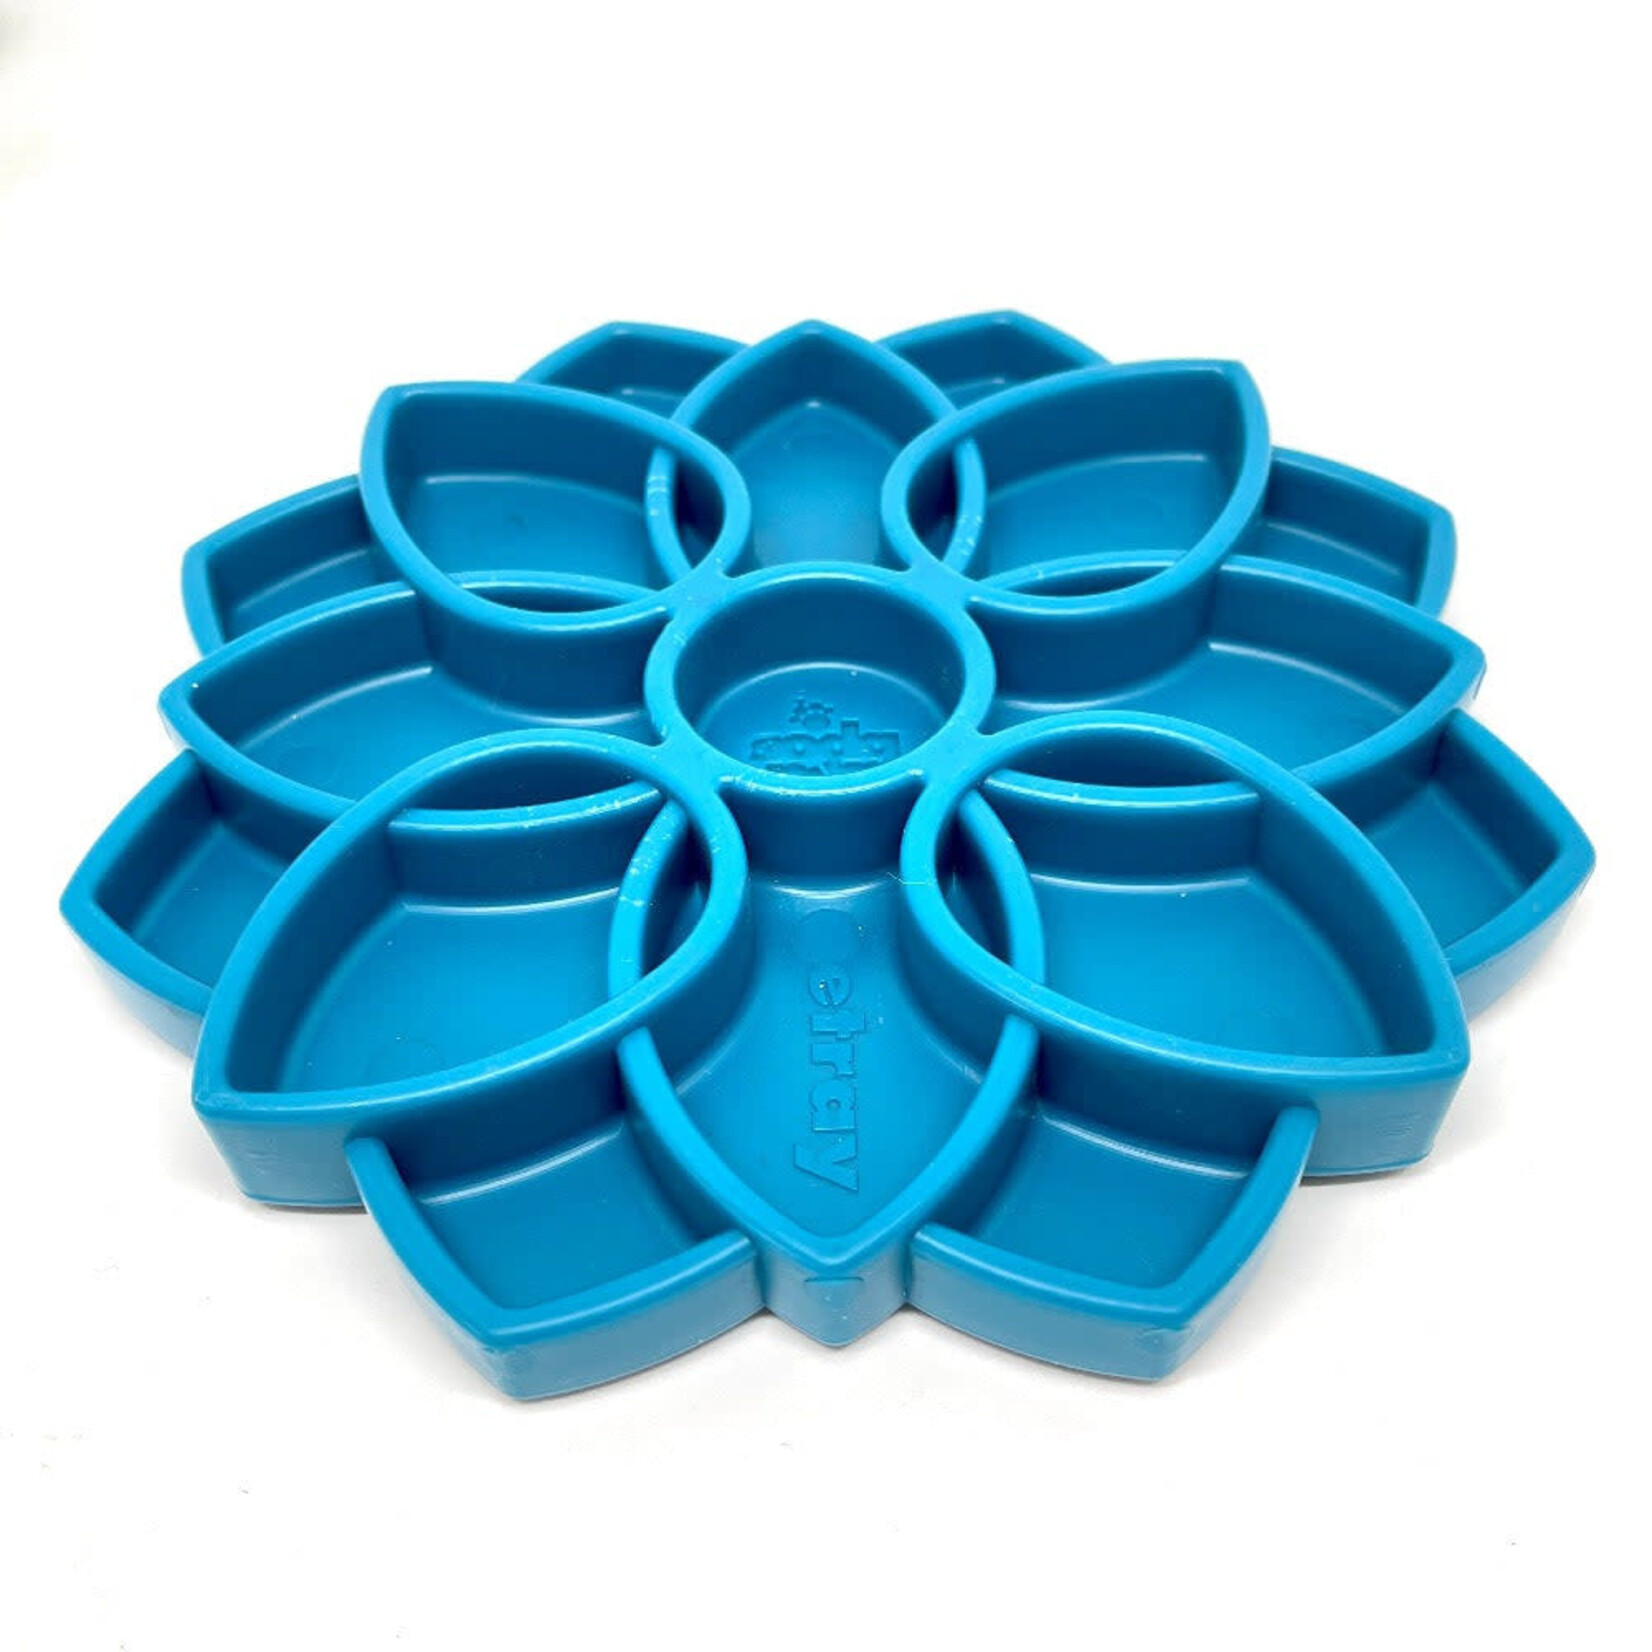 SODA PUP, Mandala Flower Slow Feeder Bowl for Dogs & Cats